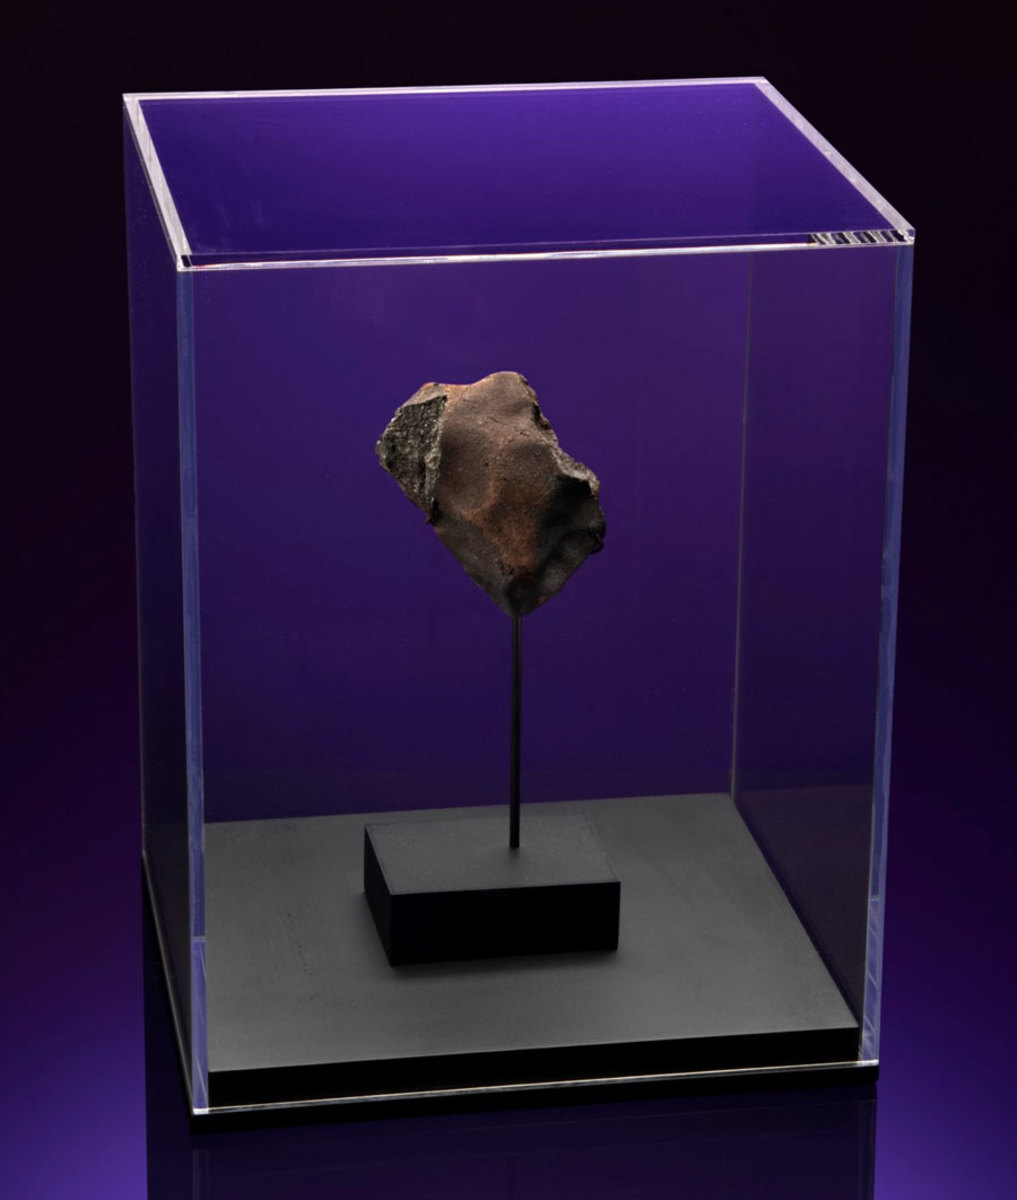 This piece of Aguas Zarcas CM2 meteorite, about 3" x 3" and weighing .33 pounds, punctured Roky's doghouse. It sold for $21,420.